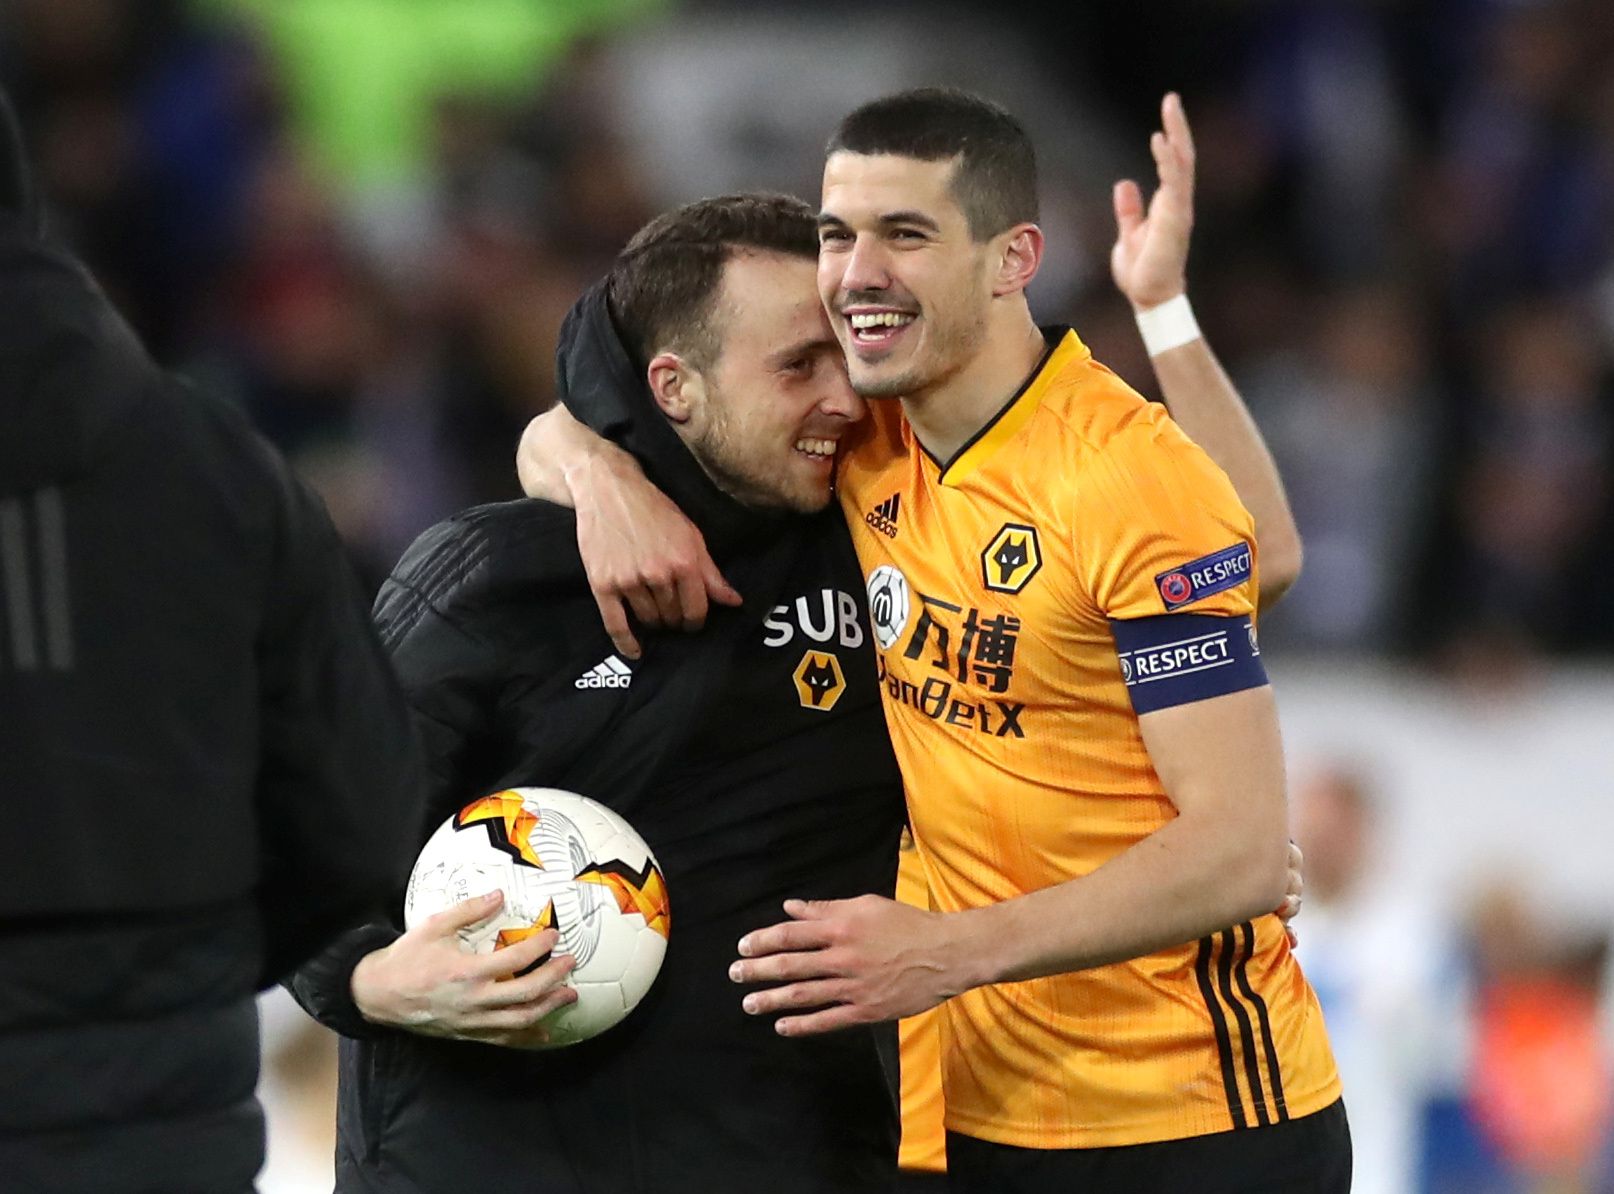 Soccer Football - Europa League - Round of 32 First Leg - Wolverhampton Wanderers v Espanyol - Molineux Stadium, Wolverhampton, Britain - February 20, 2020   Wolverhampton Wanderers' Diogo Jota celebrates holding the match ball with Conor Coady after the match    Action Images via Reuters/Carl Recine